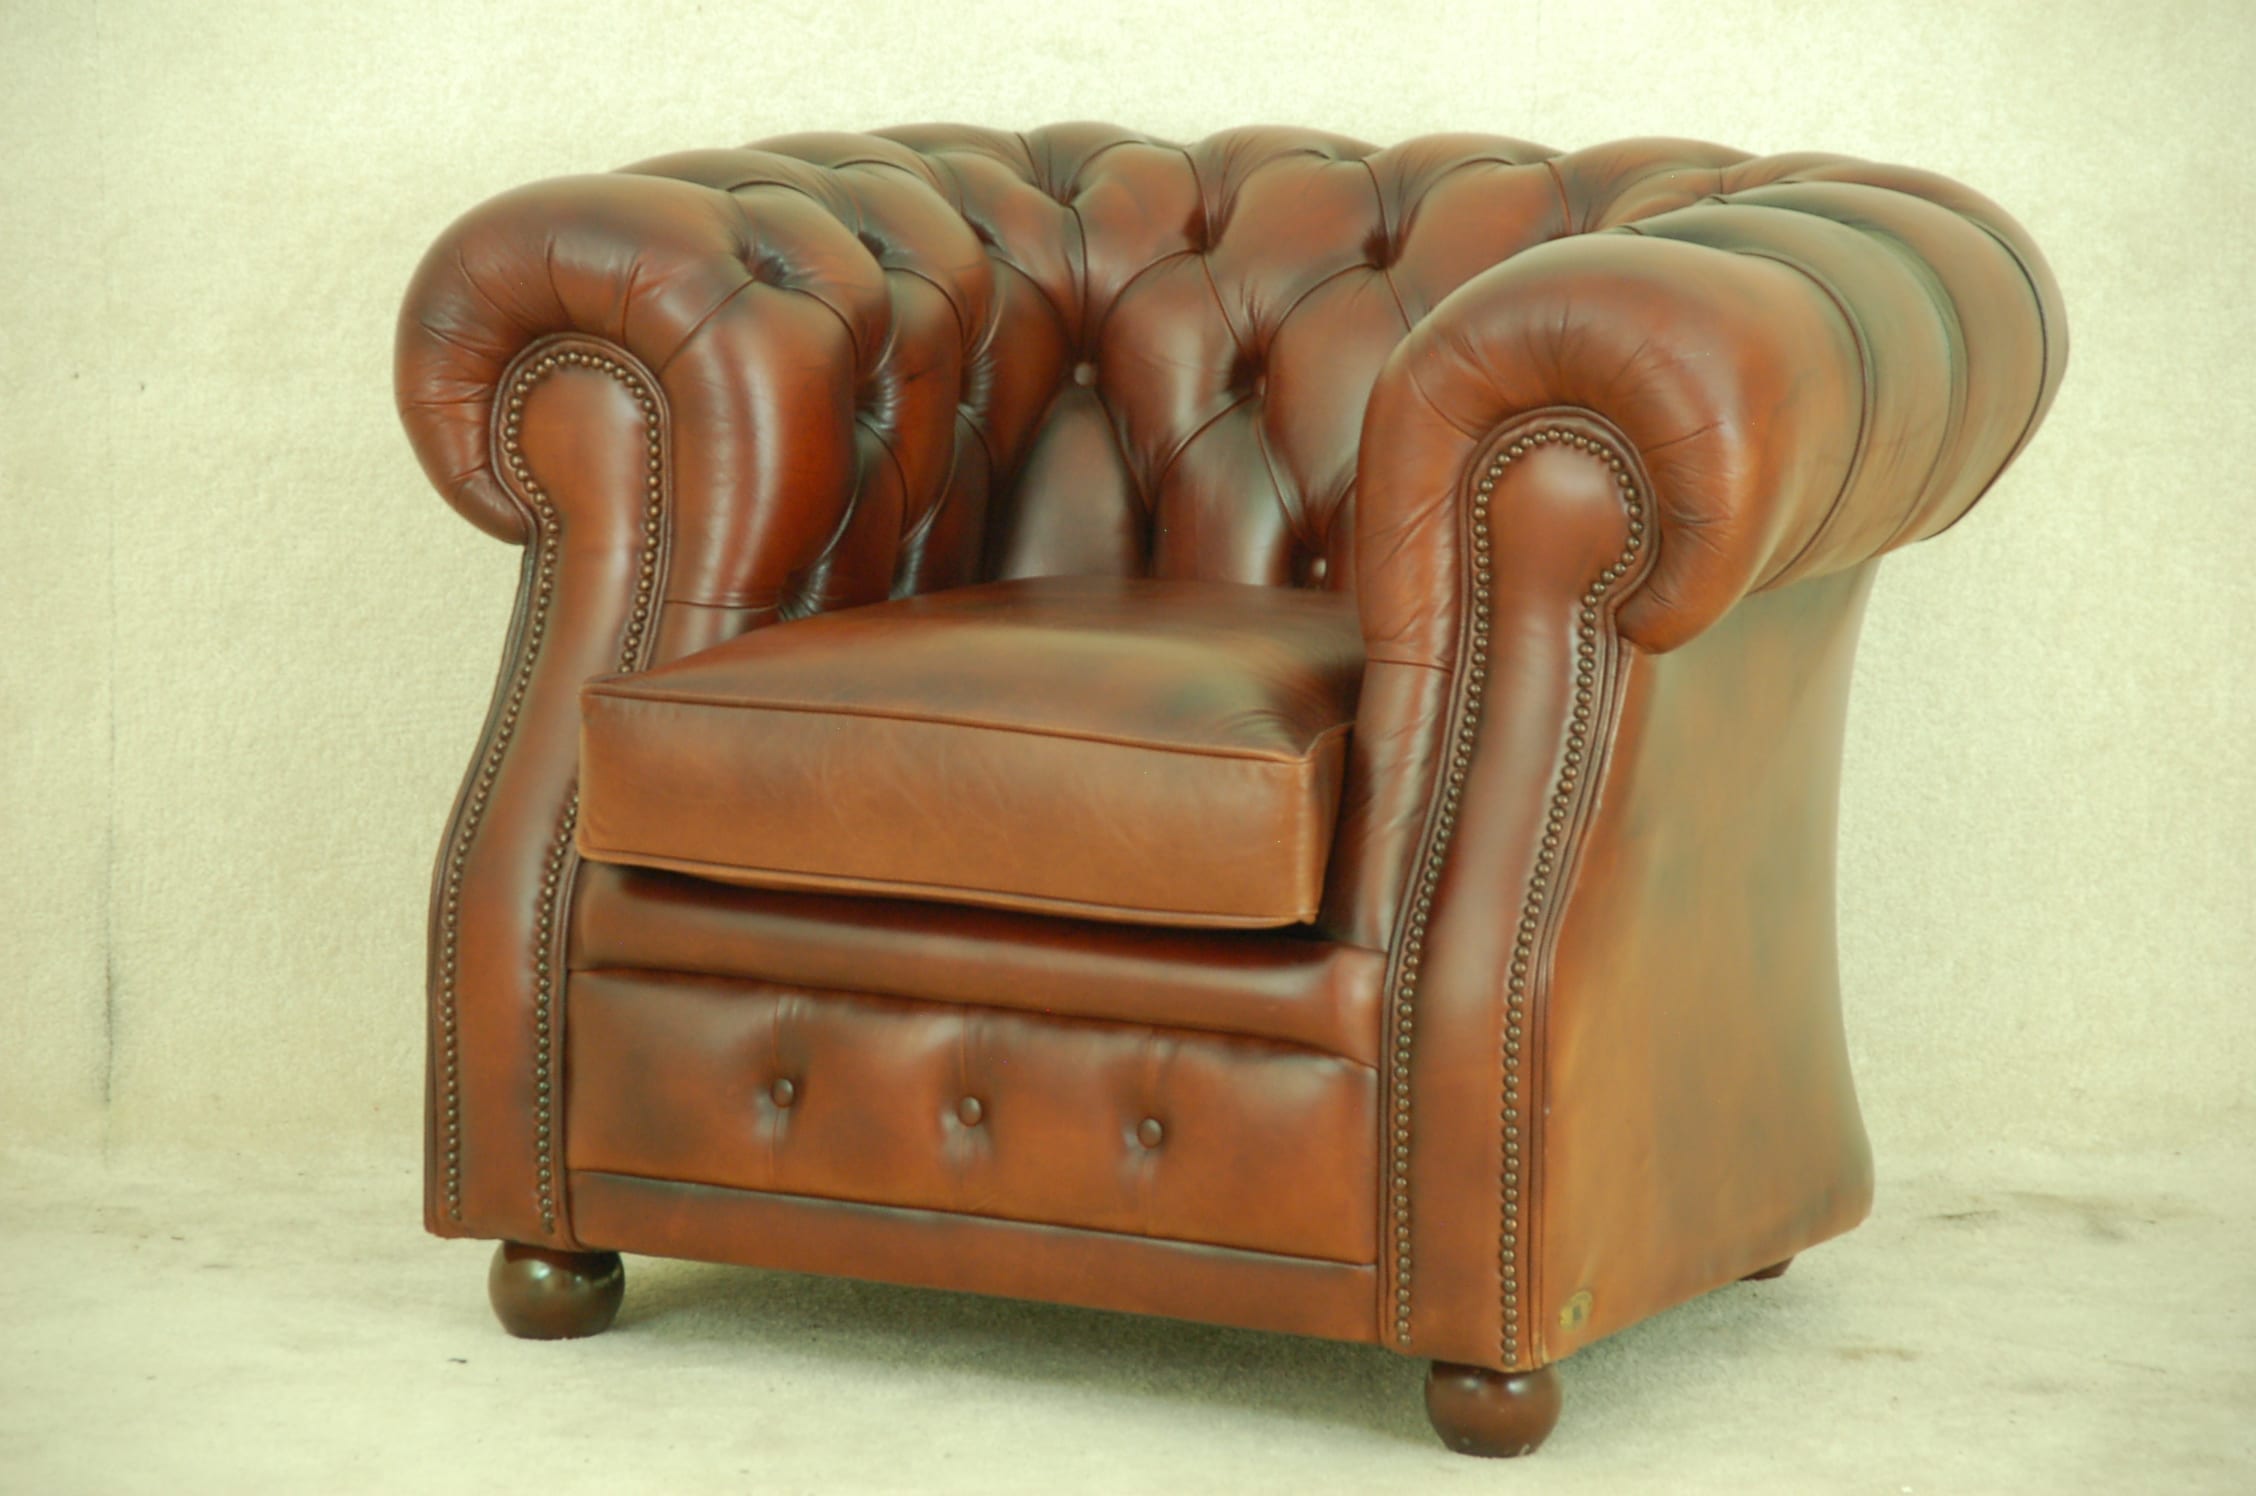 Fauteuil chesterfield #173396 - Chesterfield